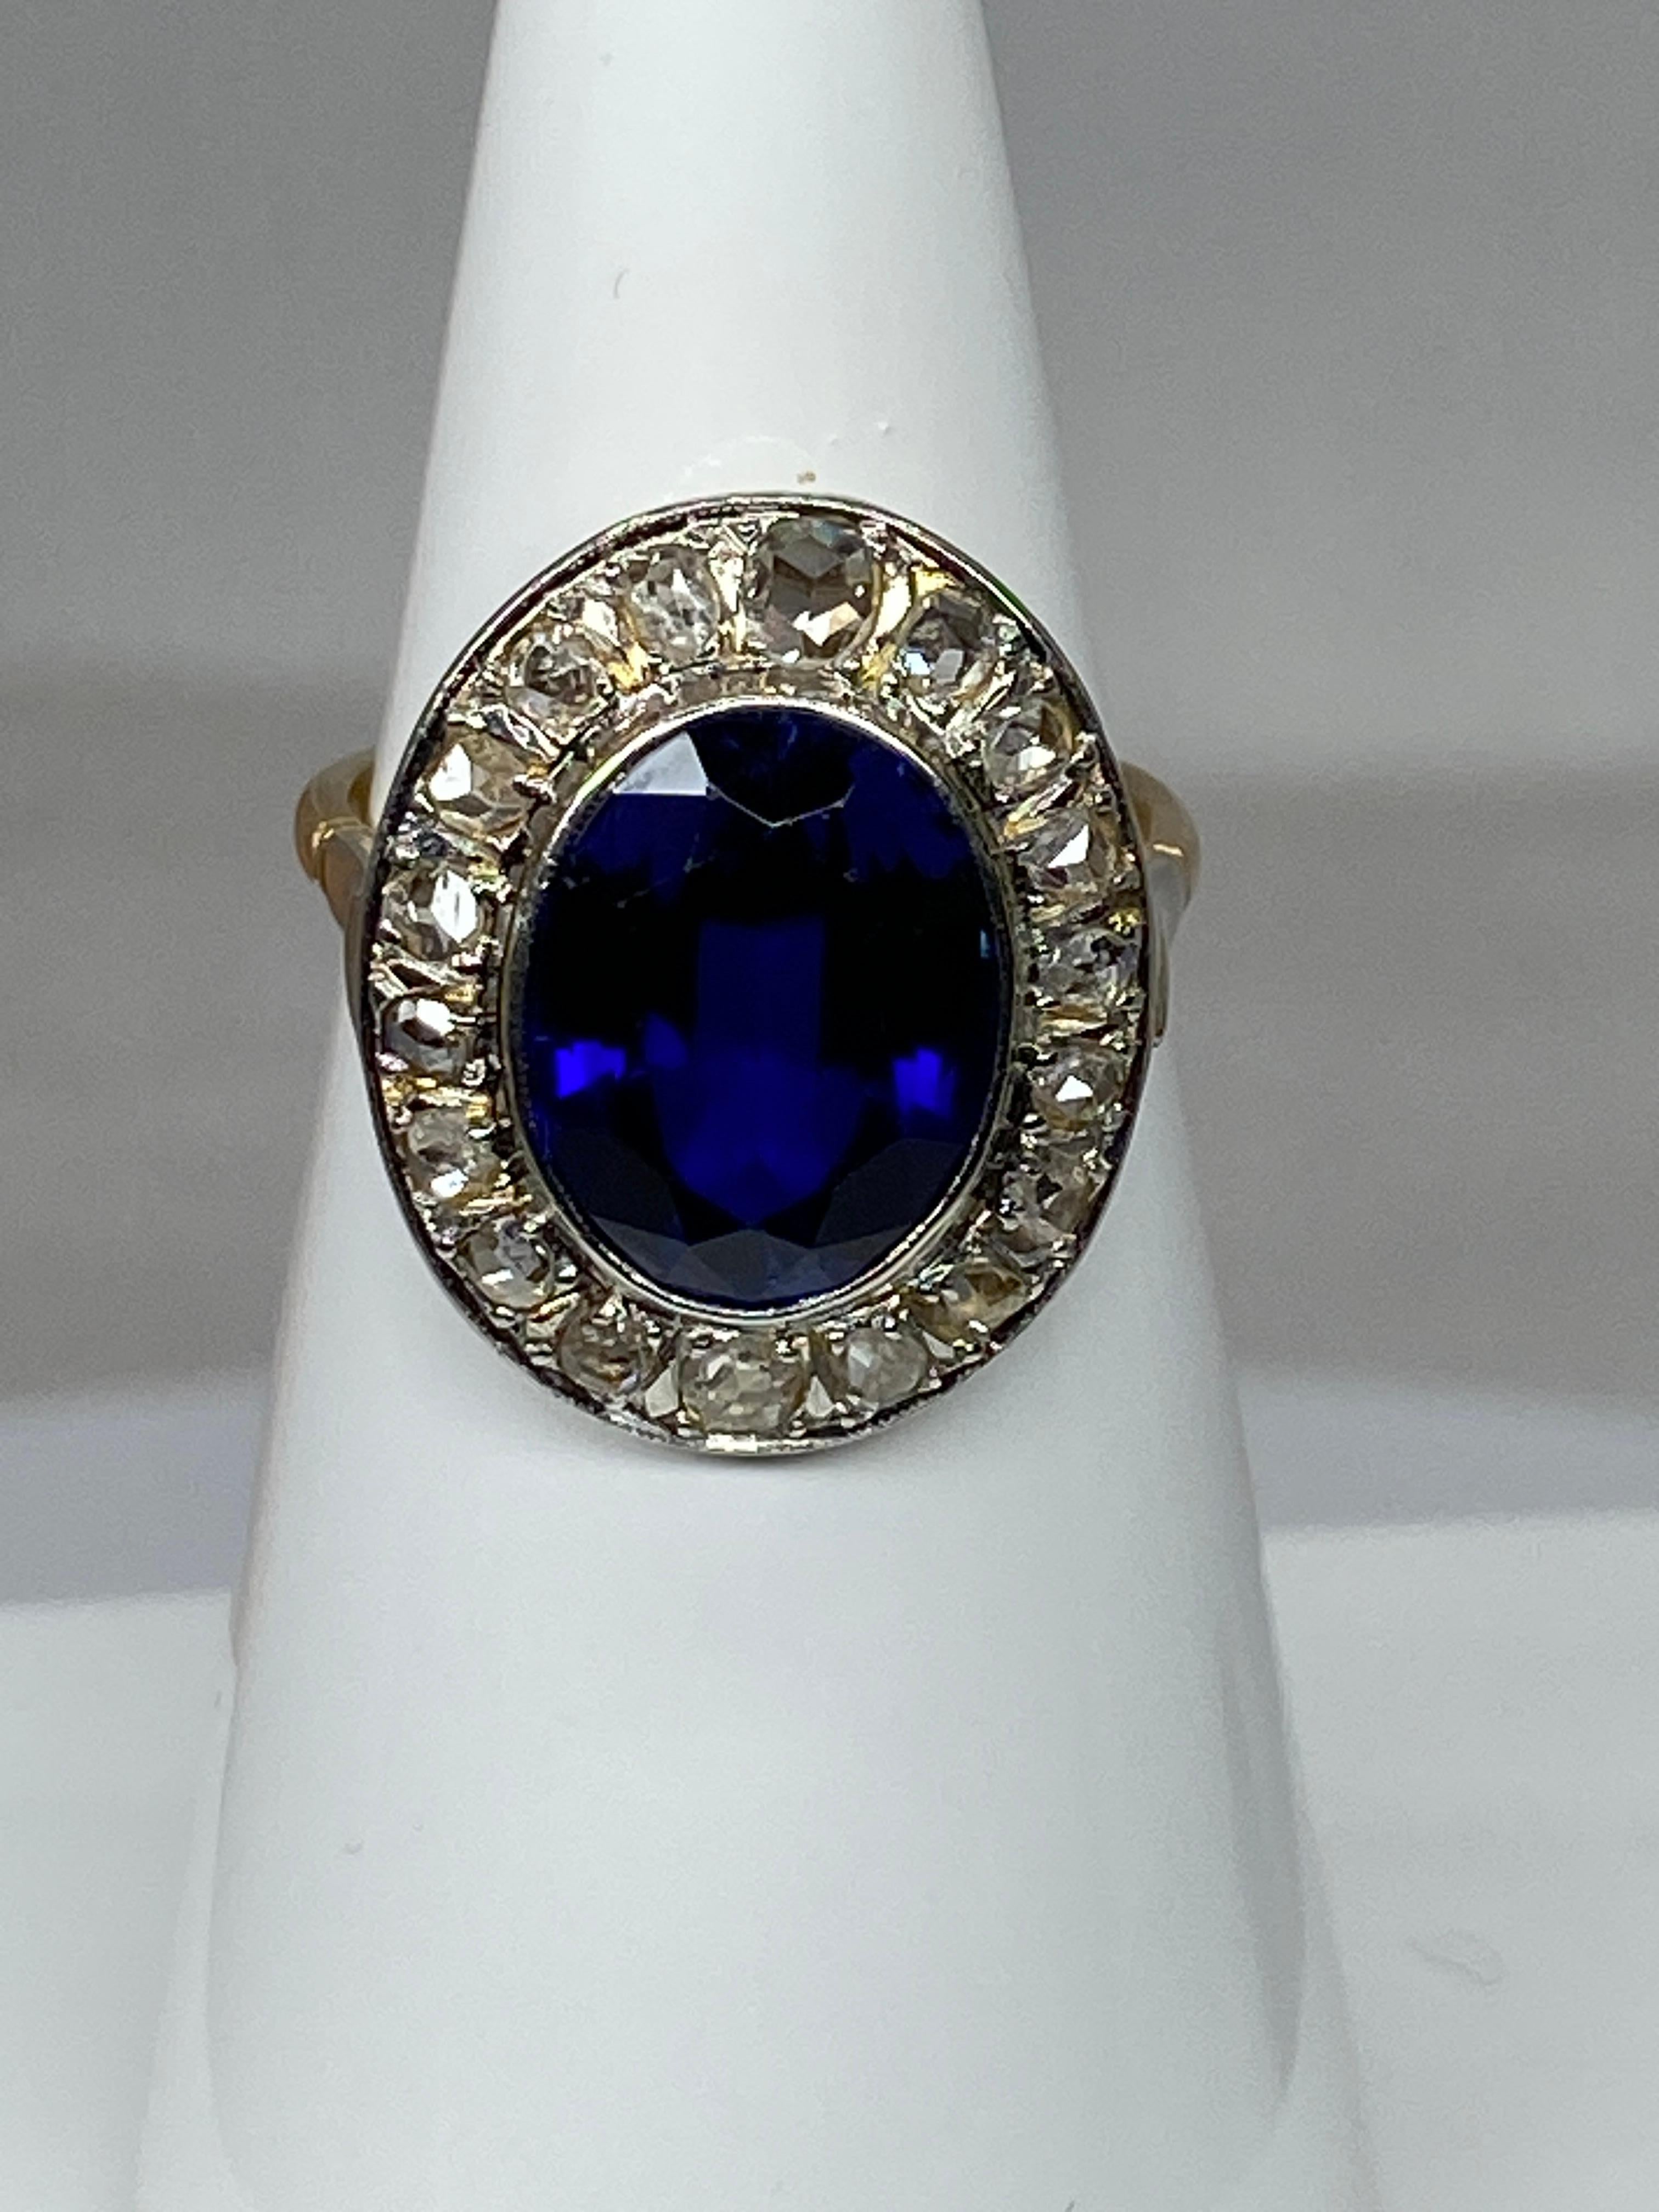 Romantic 18 Carat Gold Ring Verneuil Sapphire and Rose-Cut Diamonds, 1900 Period